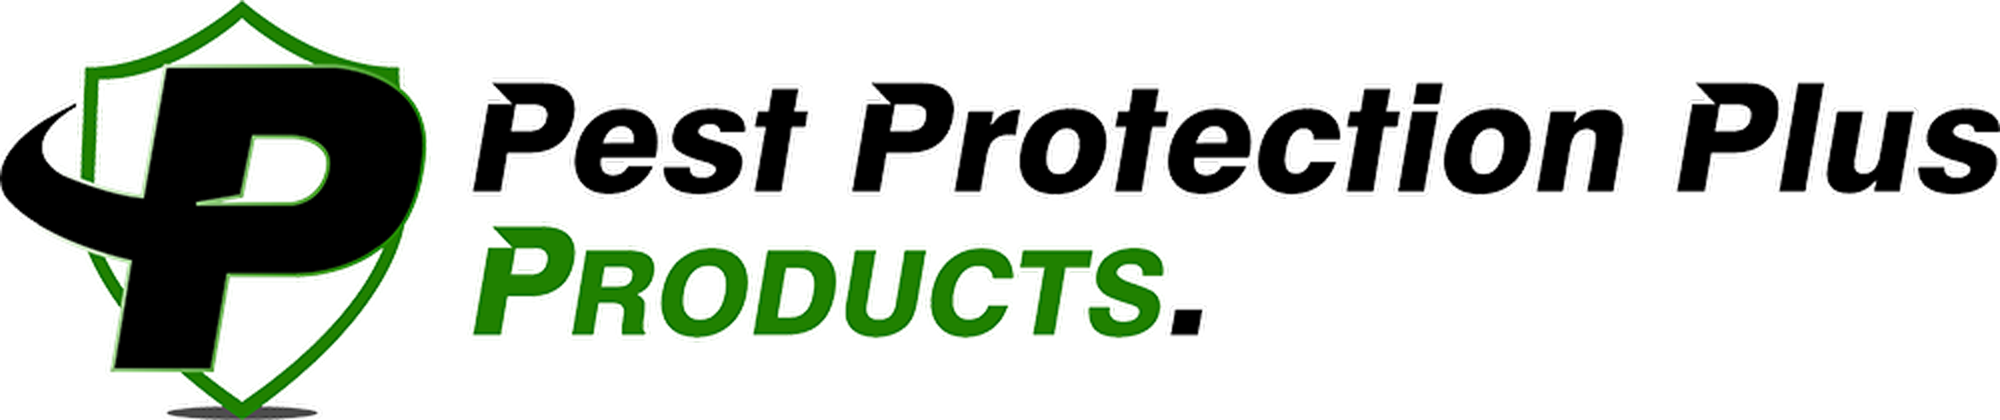 Pest Protection Plus Products